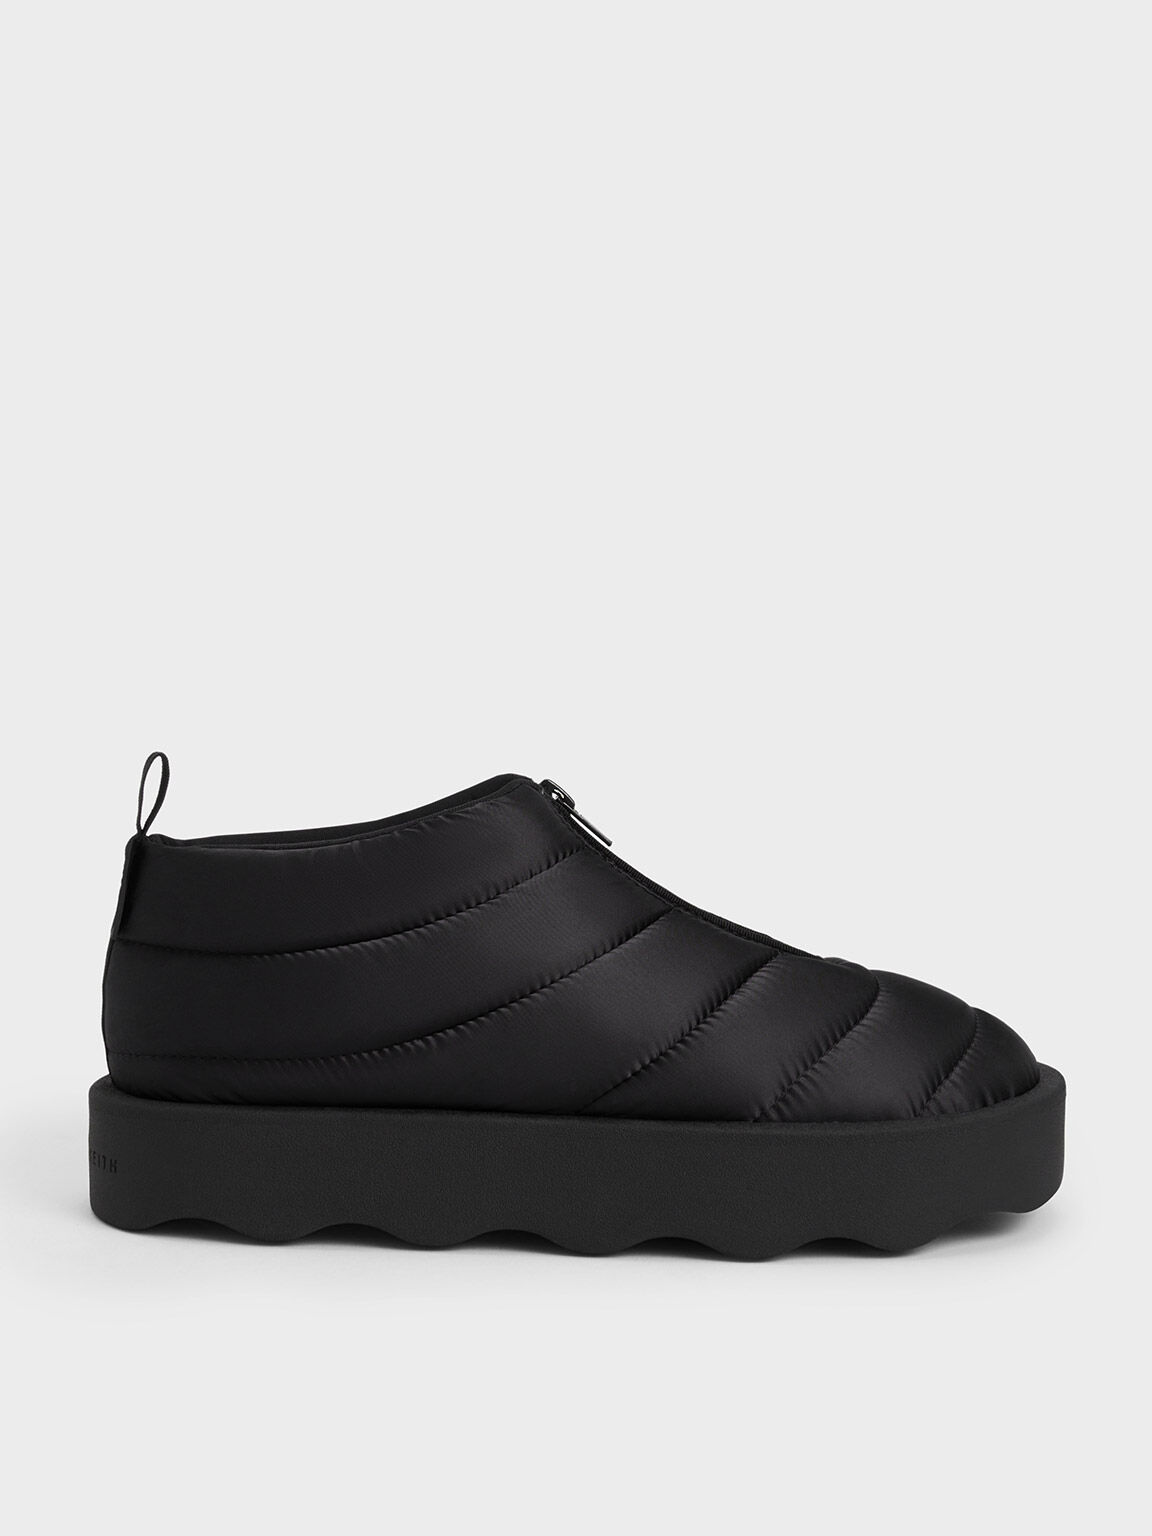 Puffy Nylon Panelled Zip-Up Sneakers, Black, hi-res